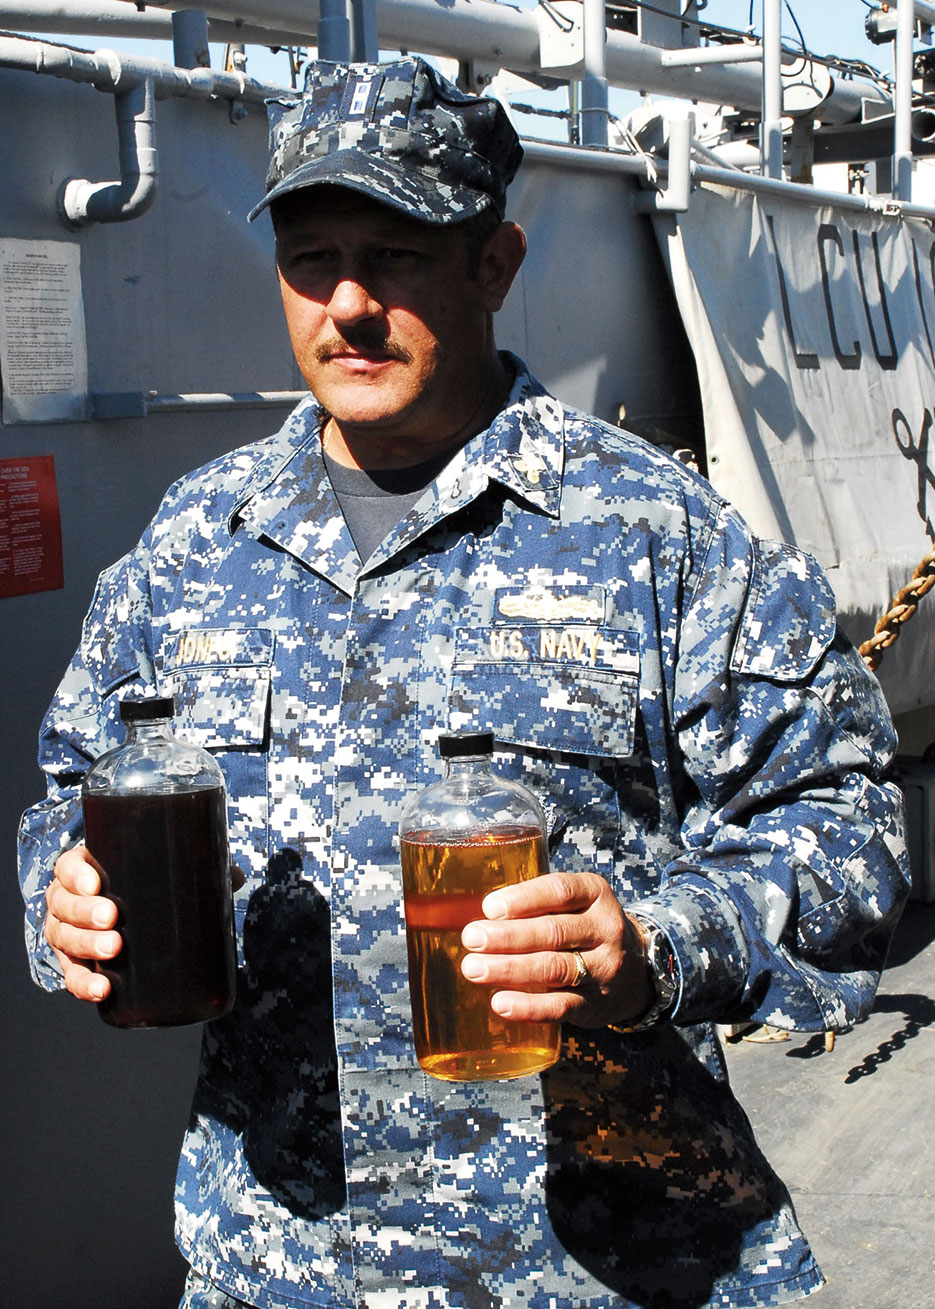 Sailor presents samples of traditional F-76 diesel fuel and 50/50 biofuel blend to illustrate use of biofuels in support of Navy Secretary’s goal to cut petroleum consumption in half by 2015 (U.S. Navy/Lolita Lewis)